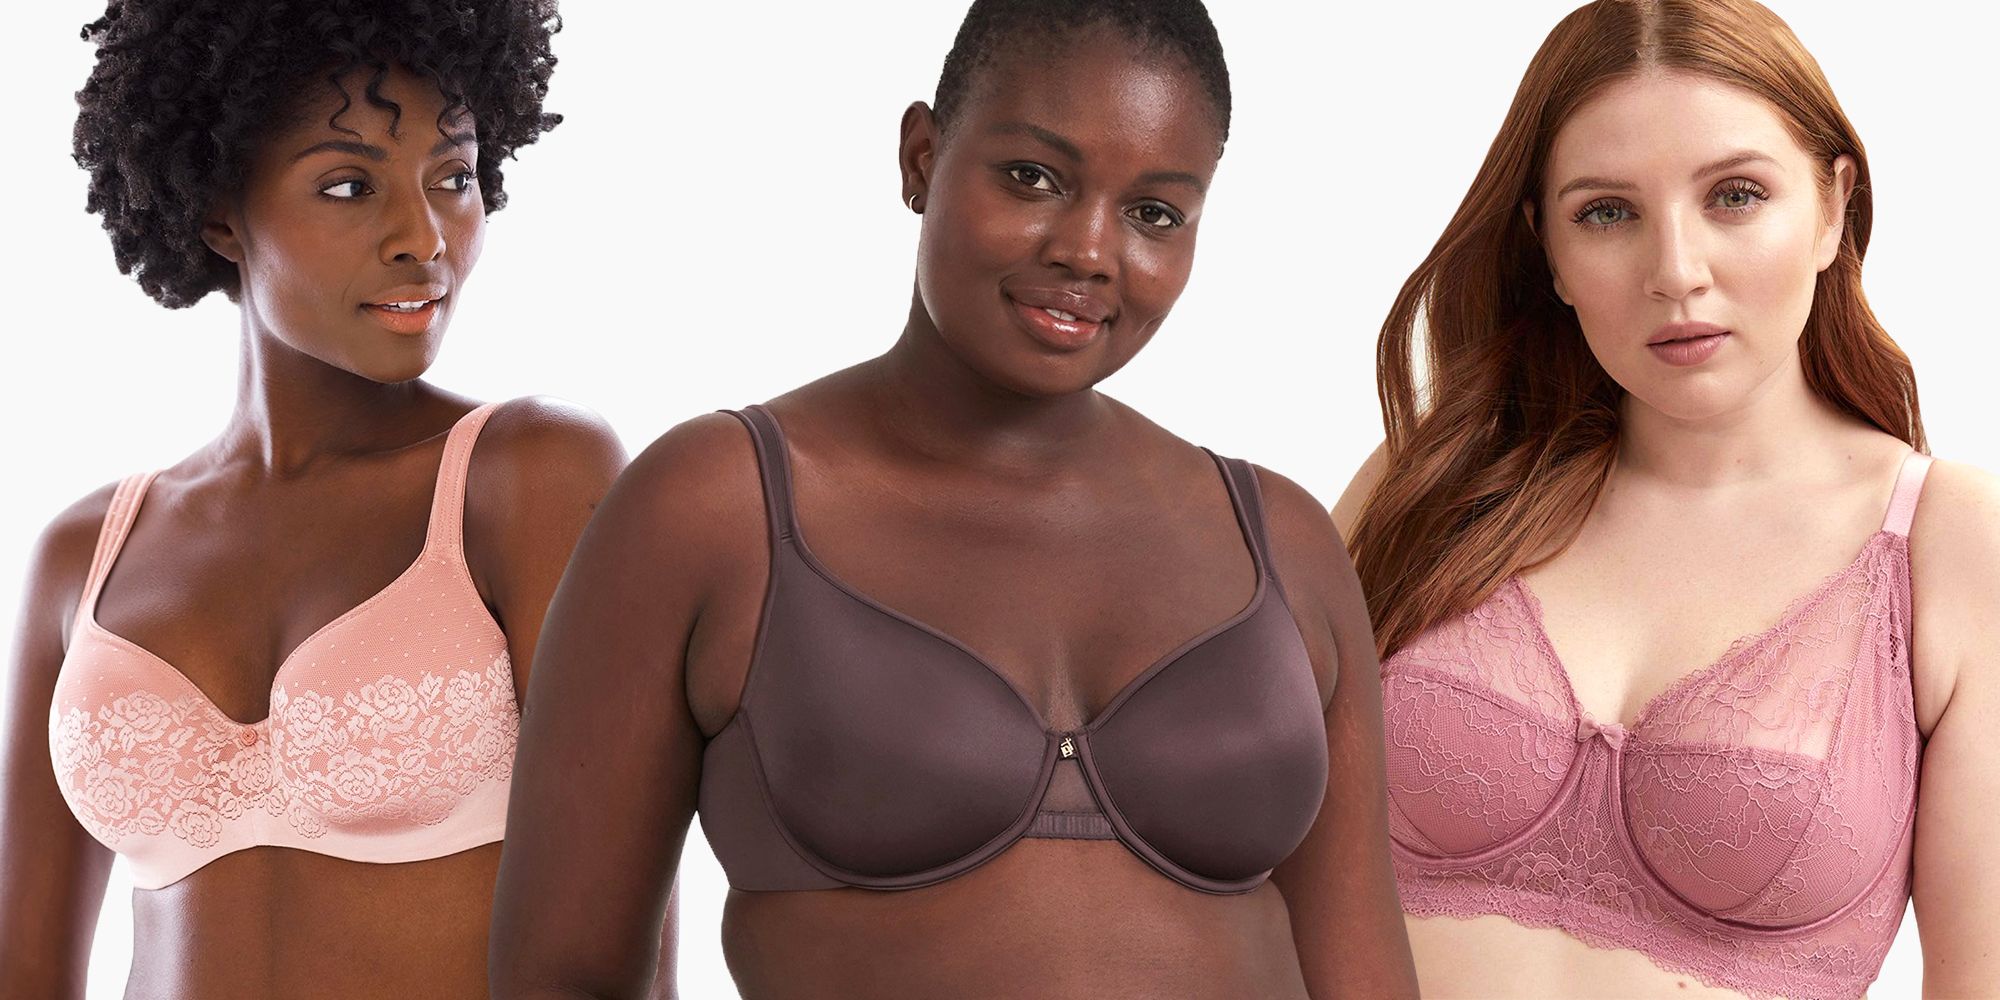 NEW! DD Cup Bra thru G Cup Bra Sizes from Target Auden Line - Affordable  DD+ to G Cup Bras @ Target? 